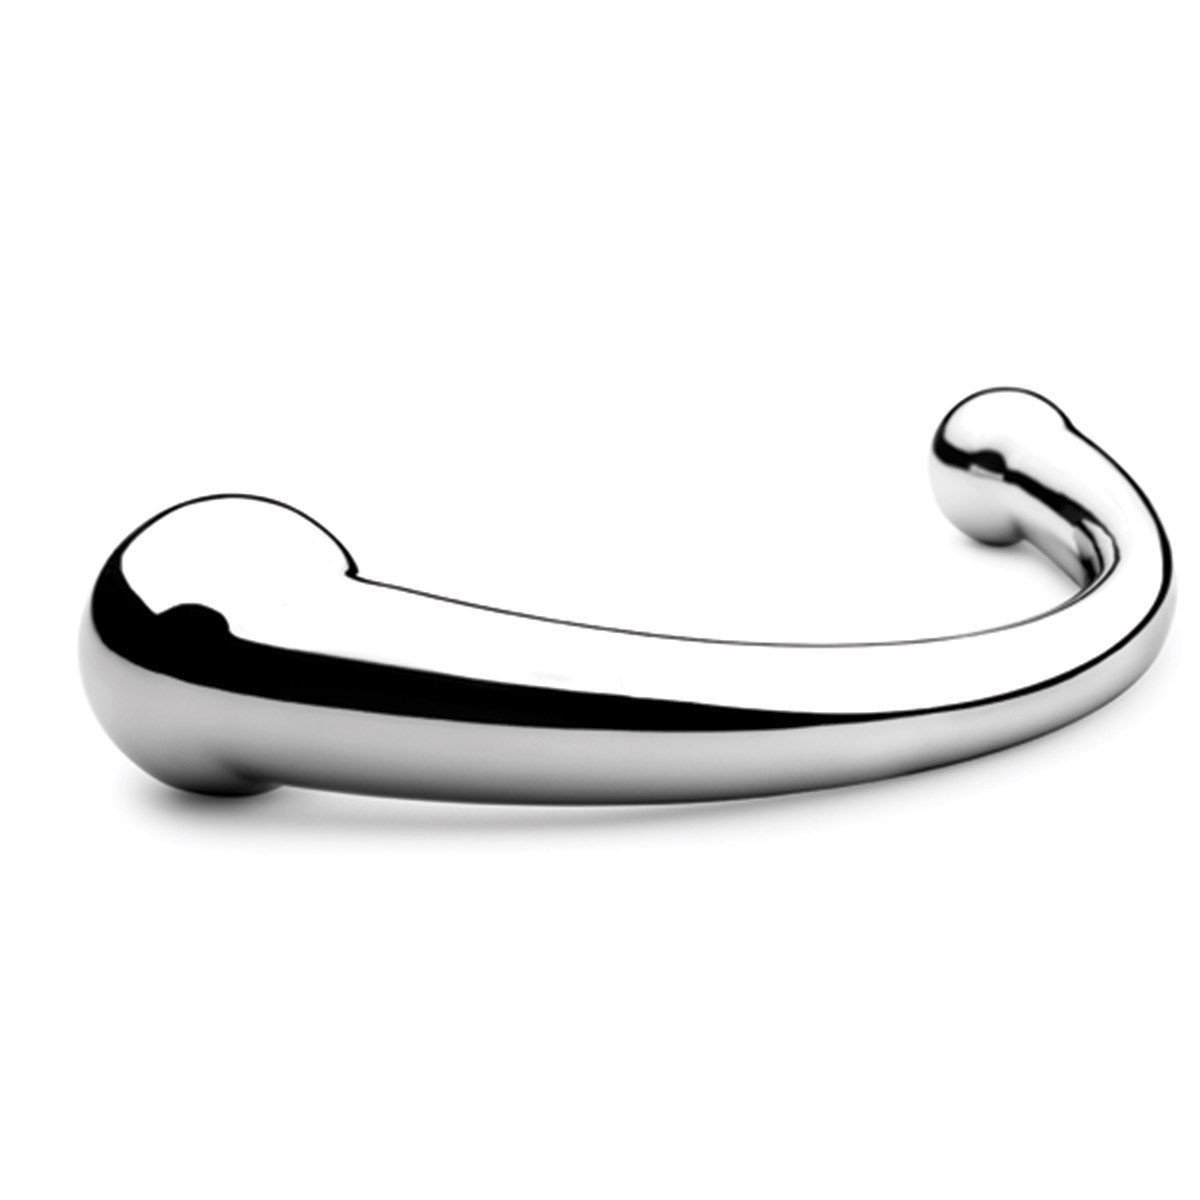 Pure Wand Prostate Massager free shipping - Beyond Delights